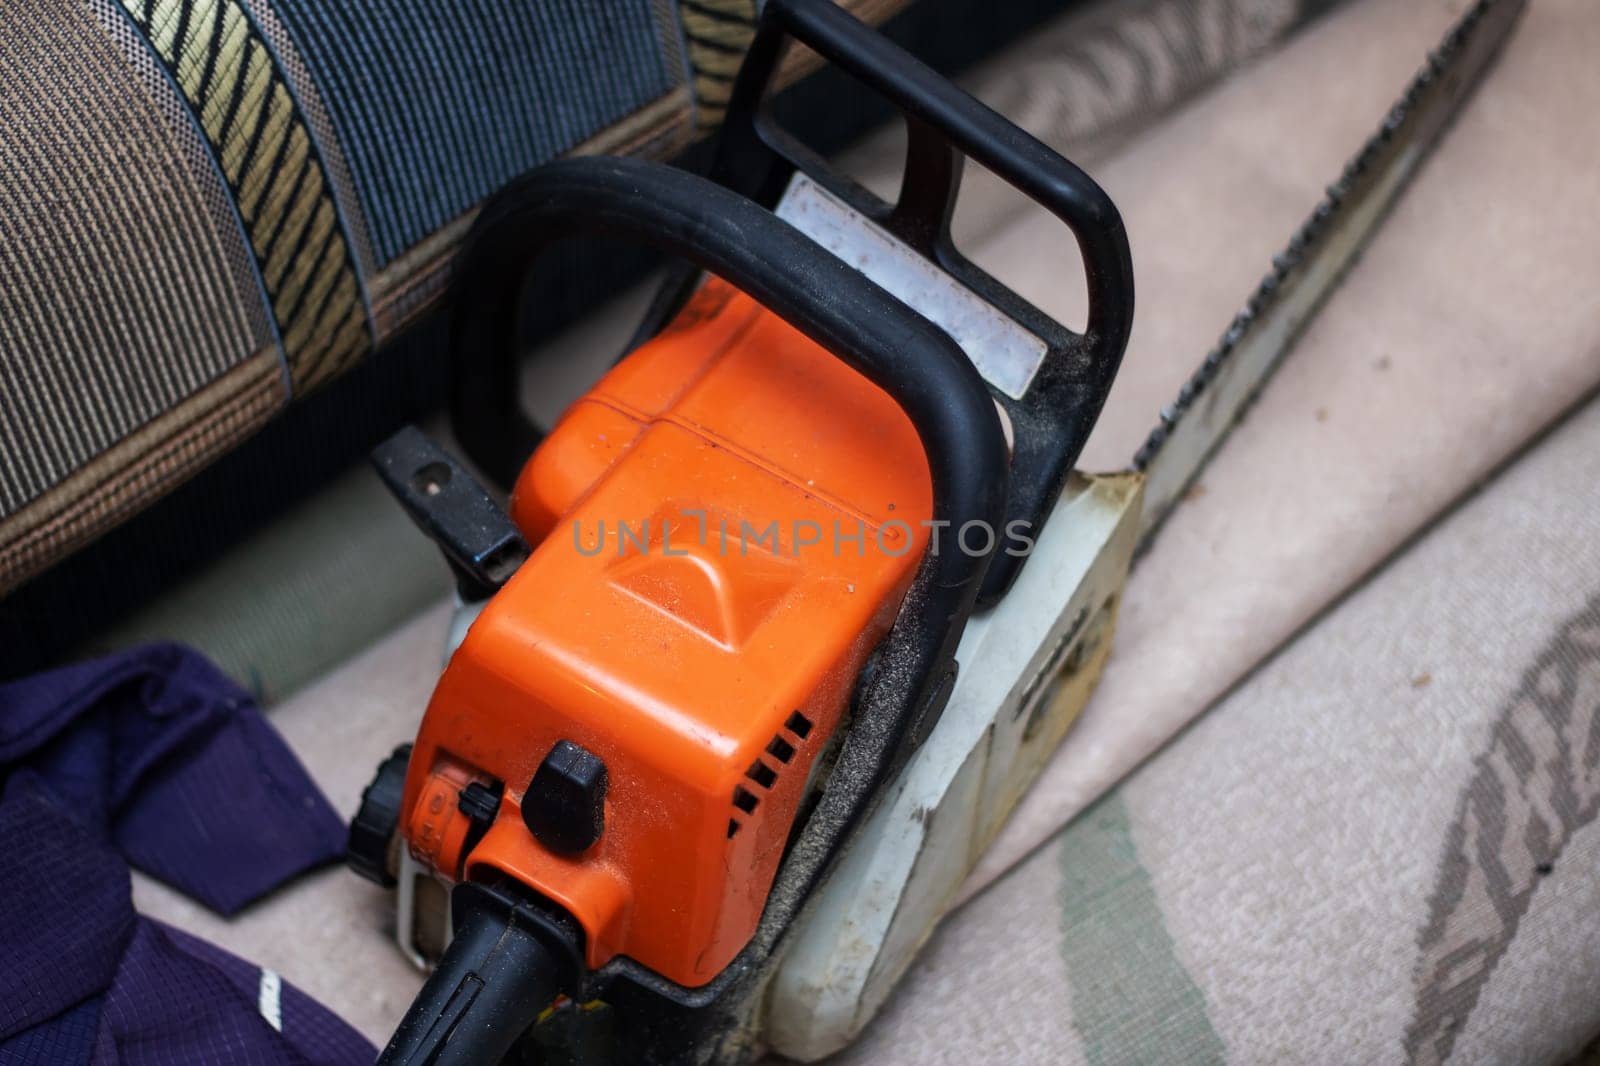 Chainsaw rests on hardwood flooring, a powerful gas machine by Vera1703